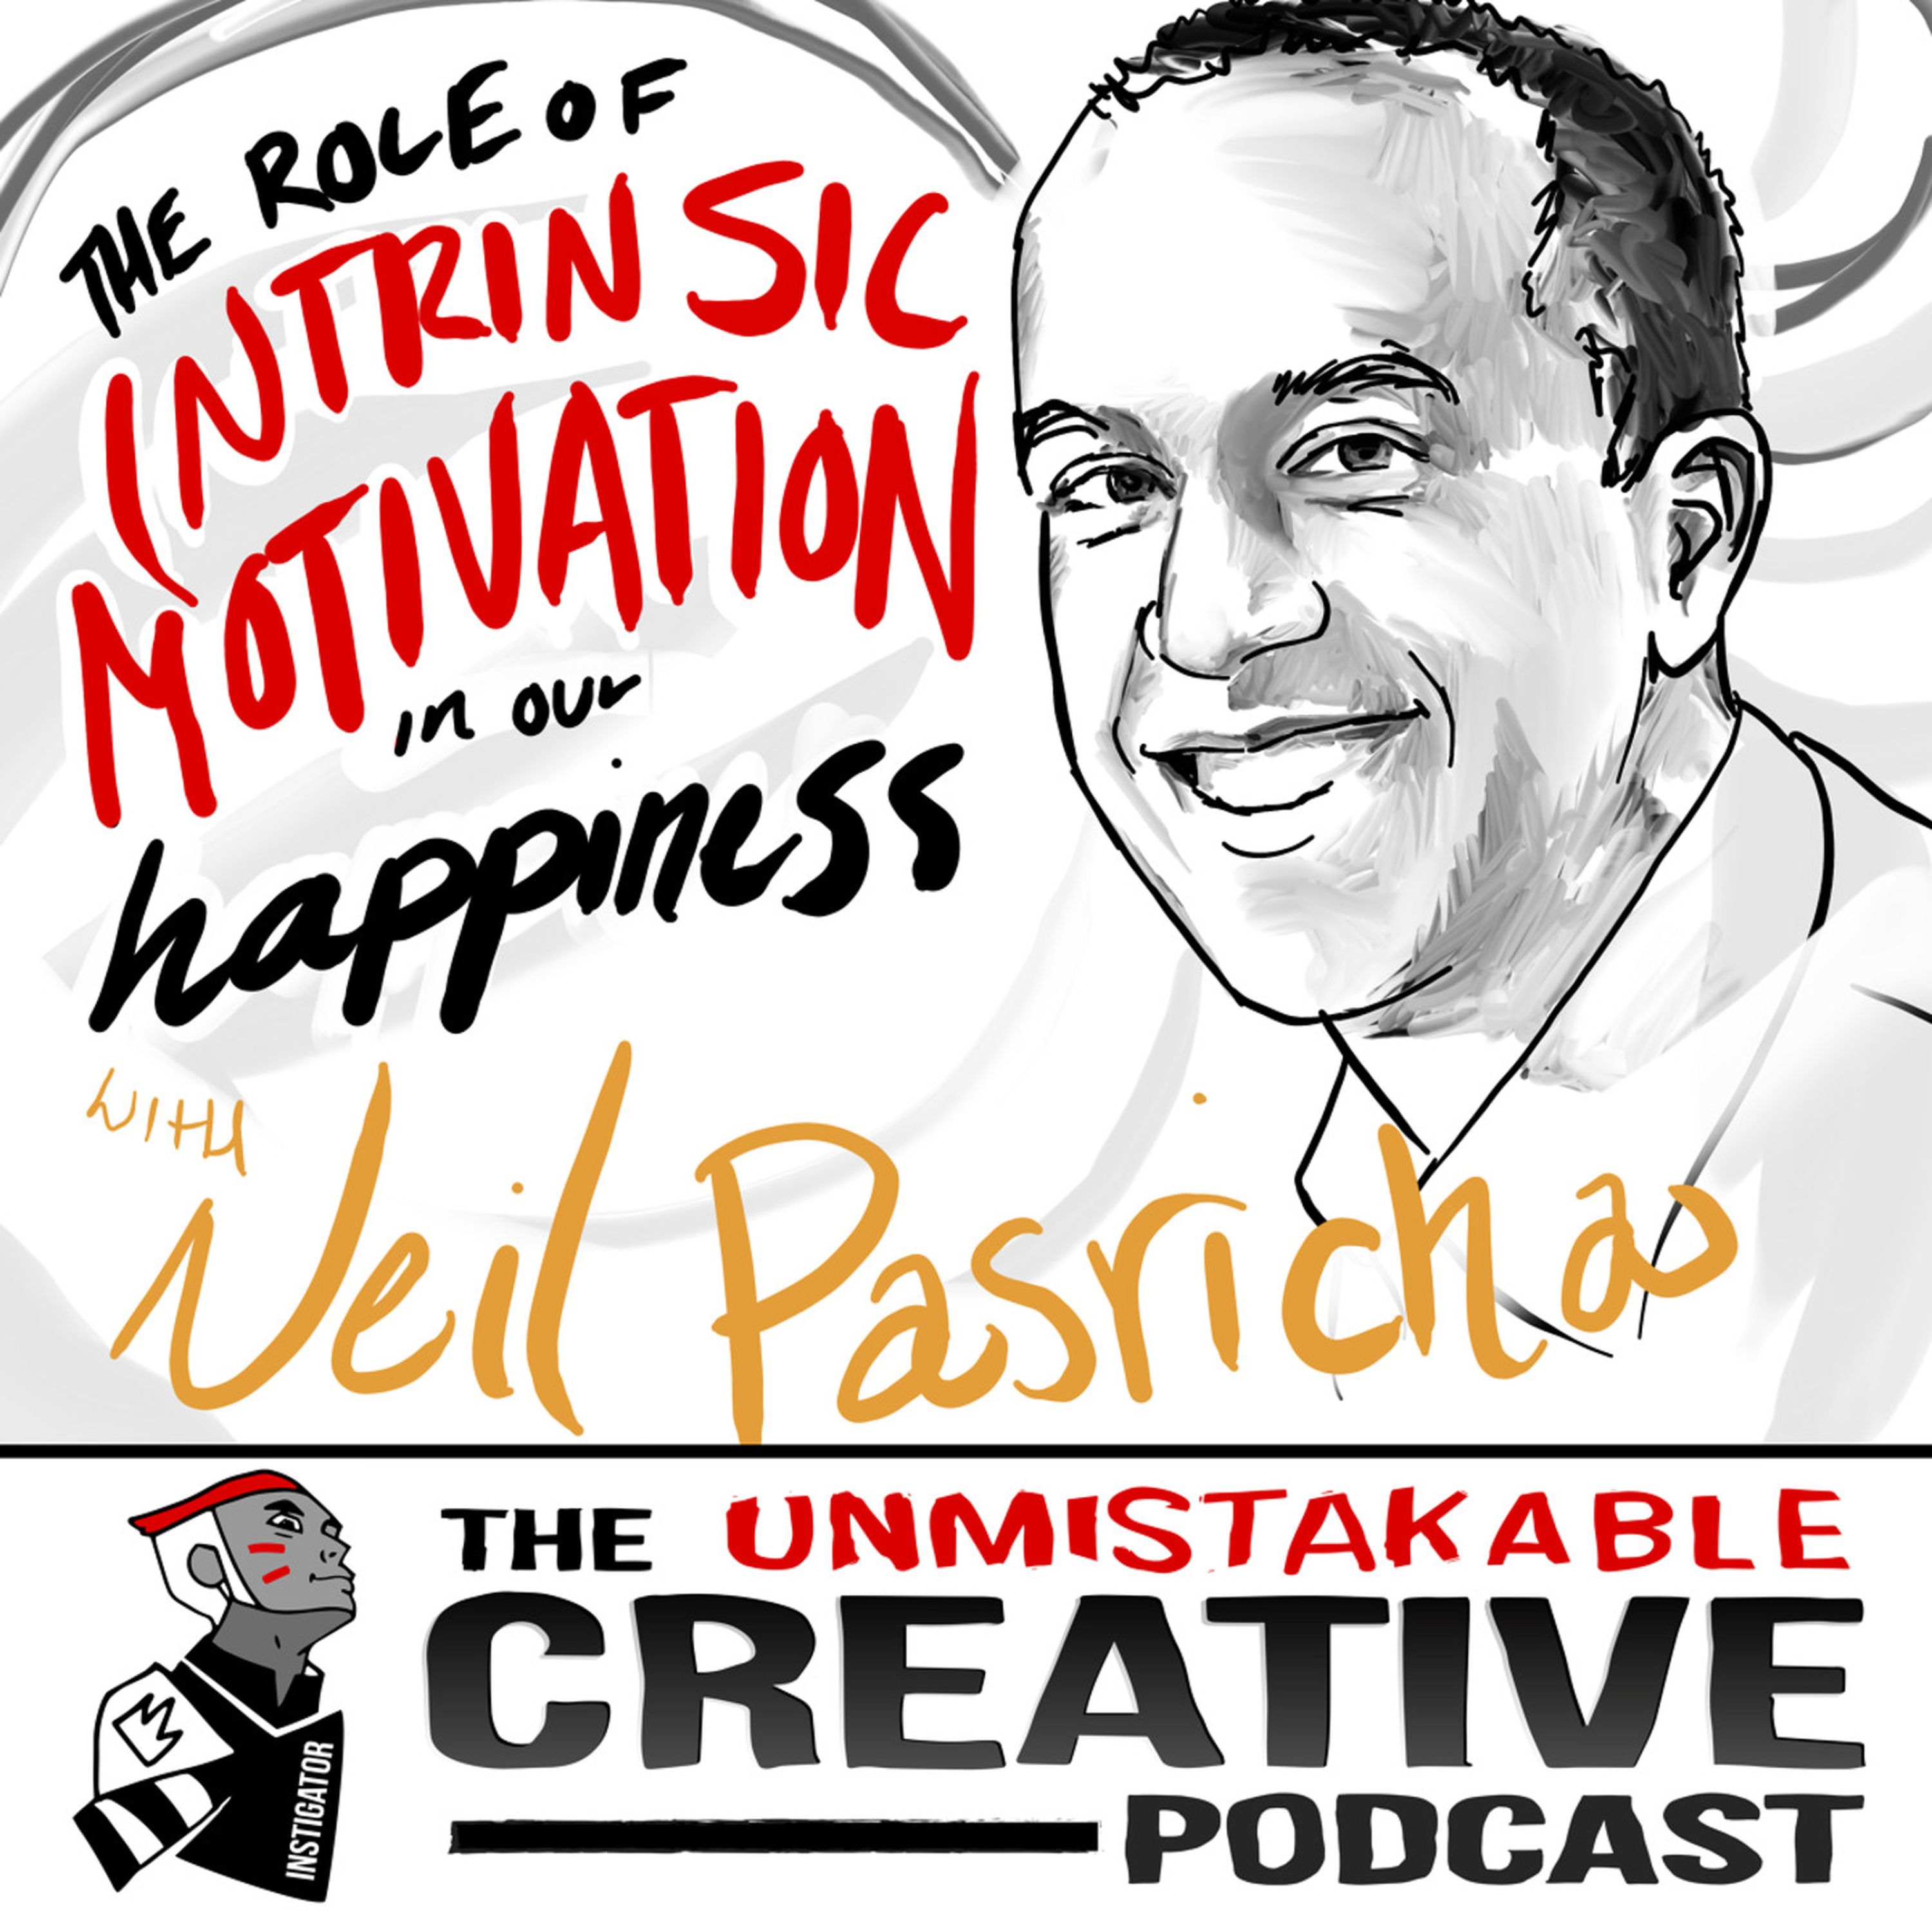 The Role of Intrinsic Motivation in Our Happiness with Neil Pasricha Image